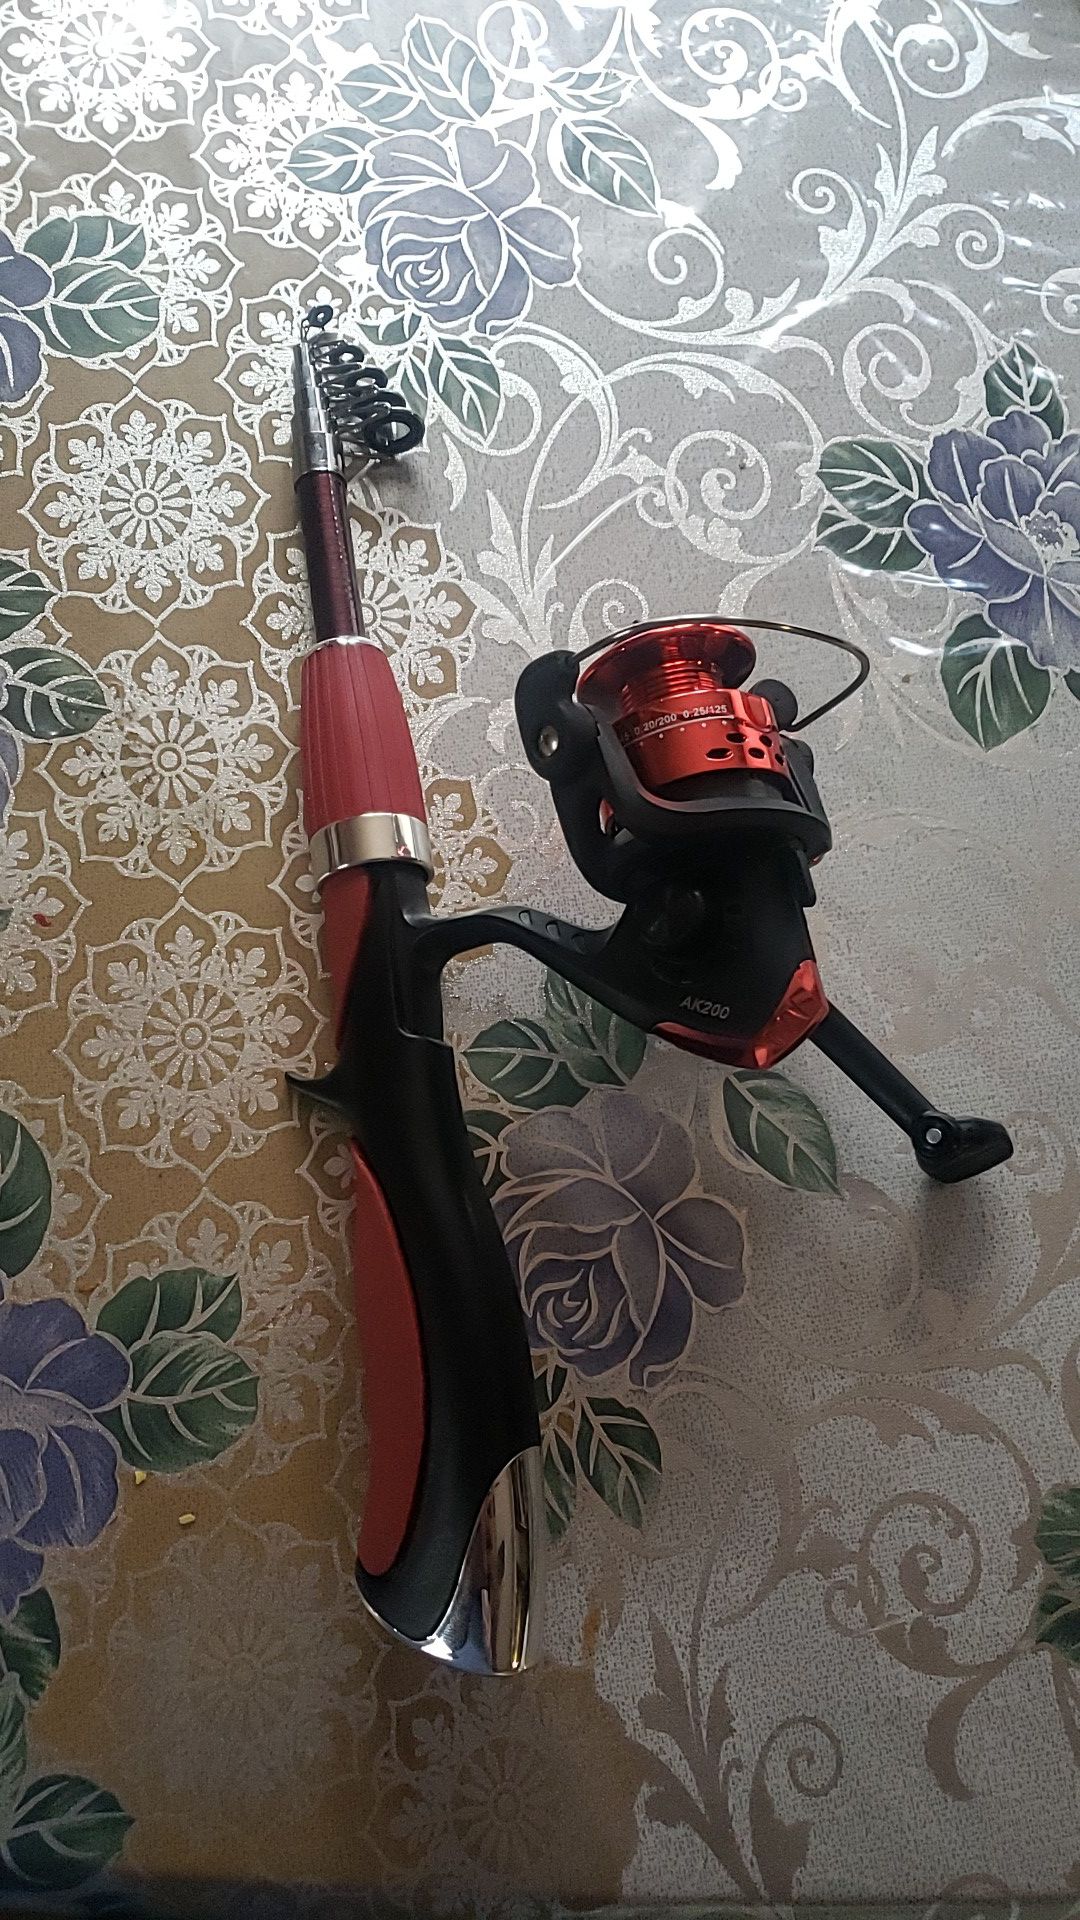 Brand new fishing pole whit reel